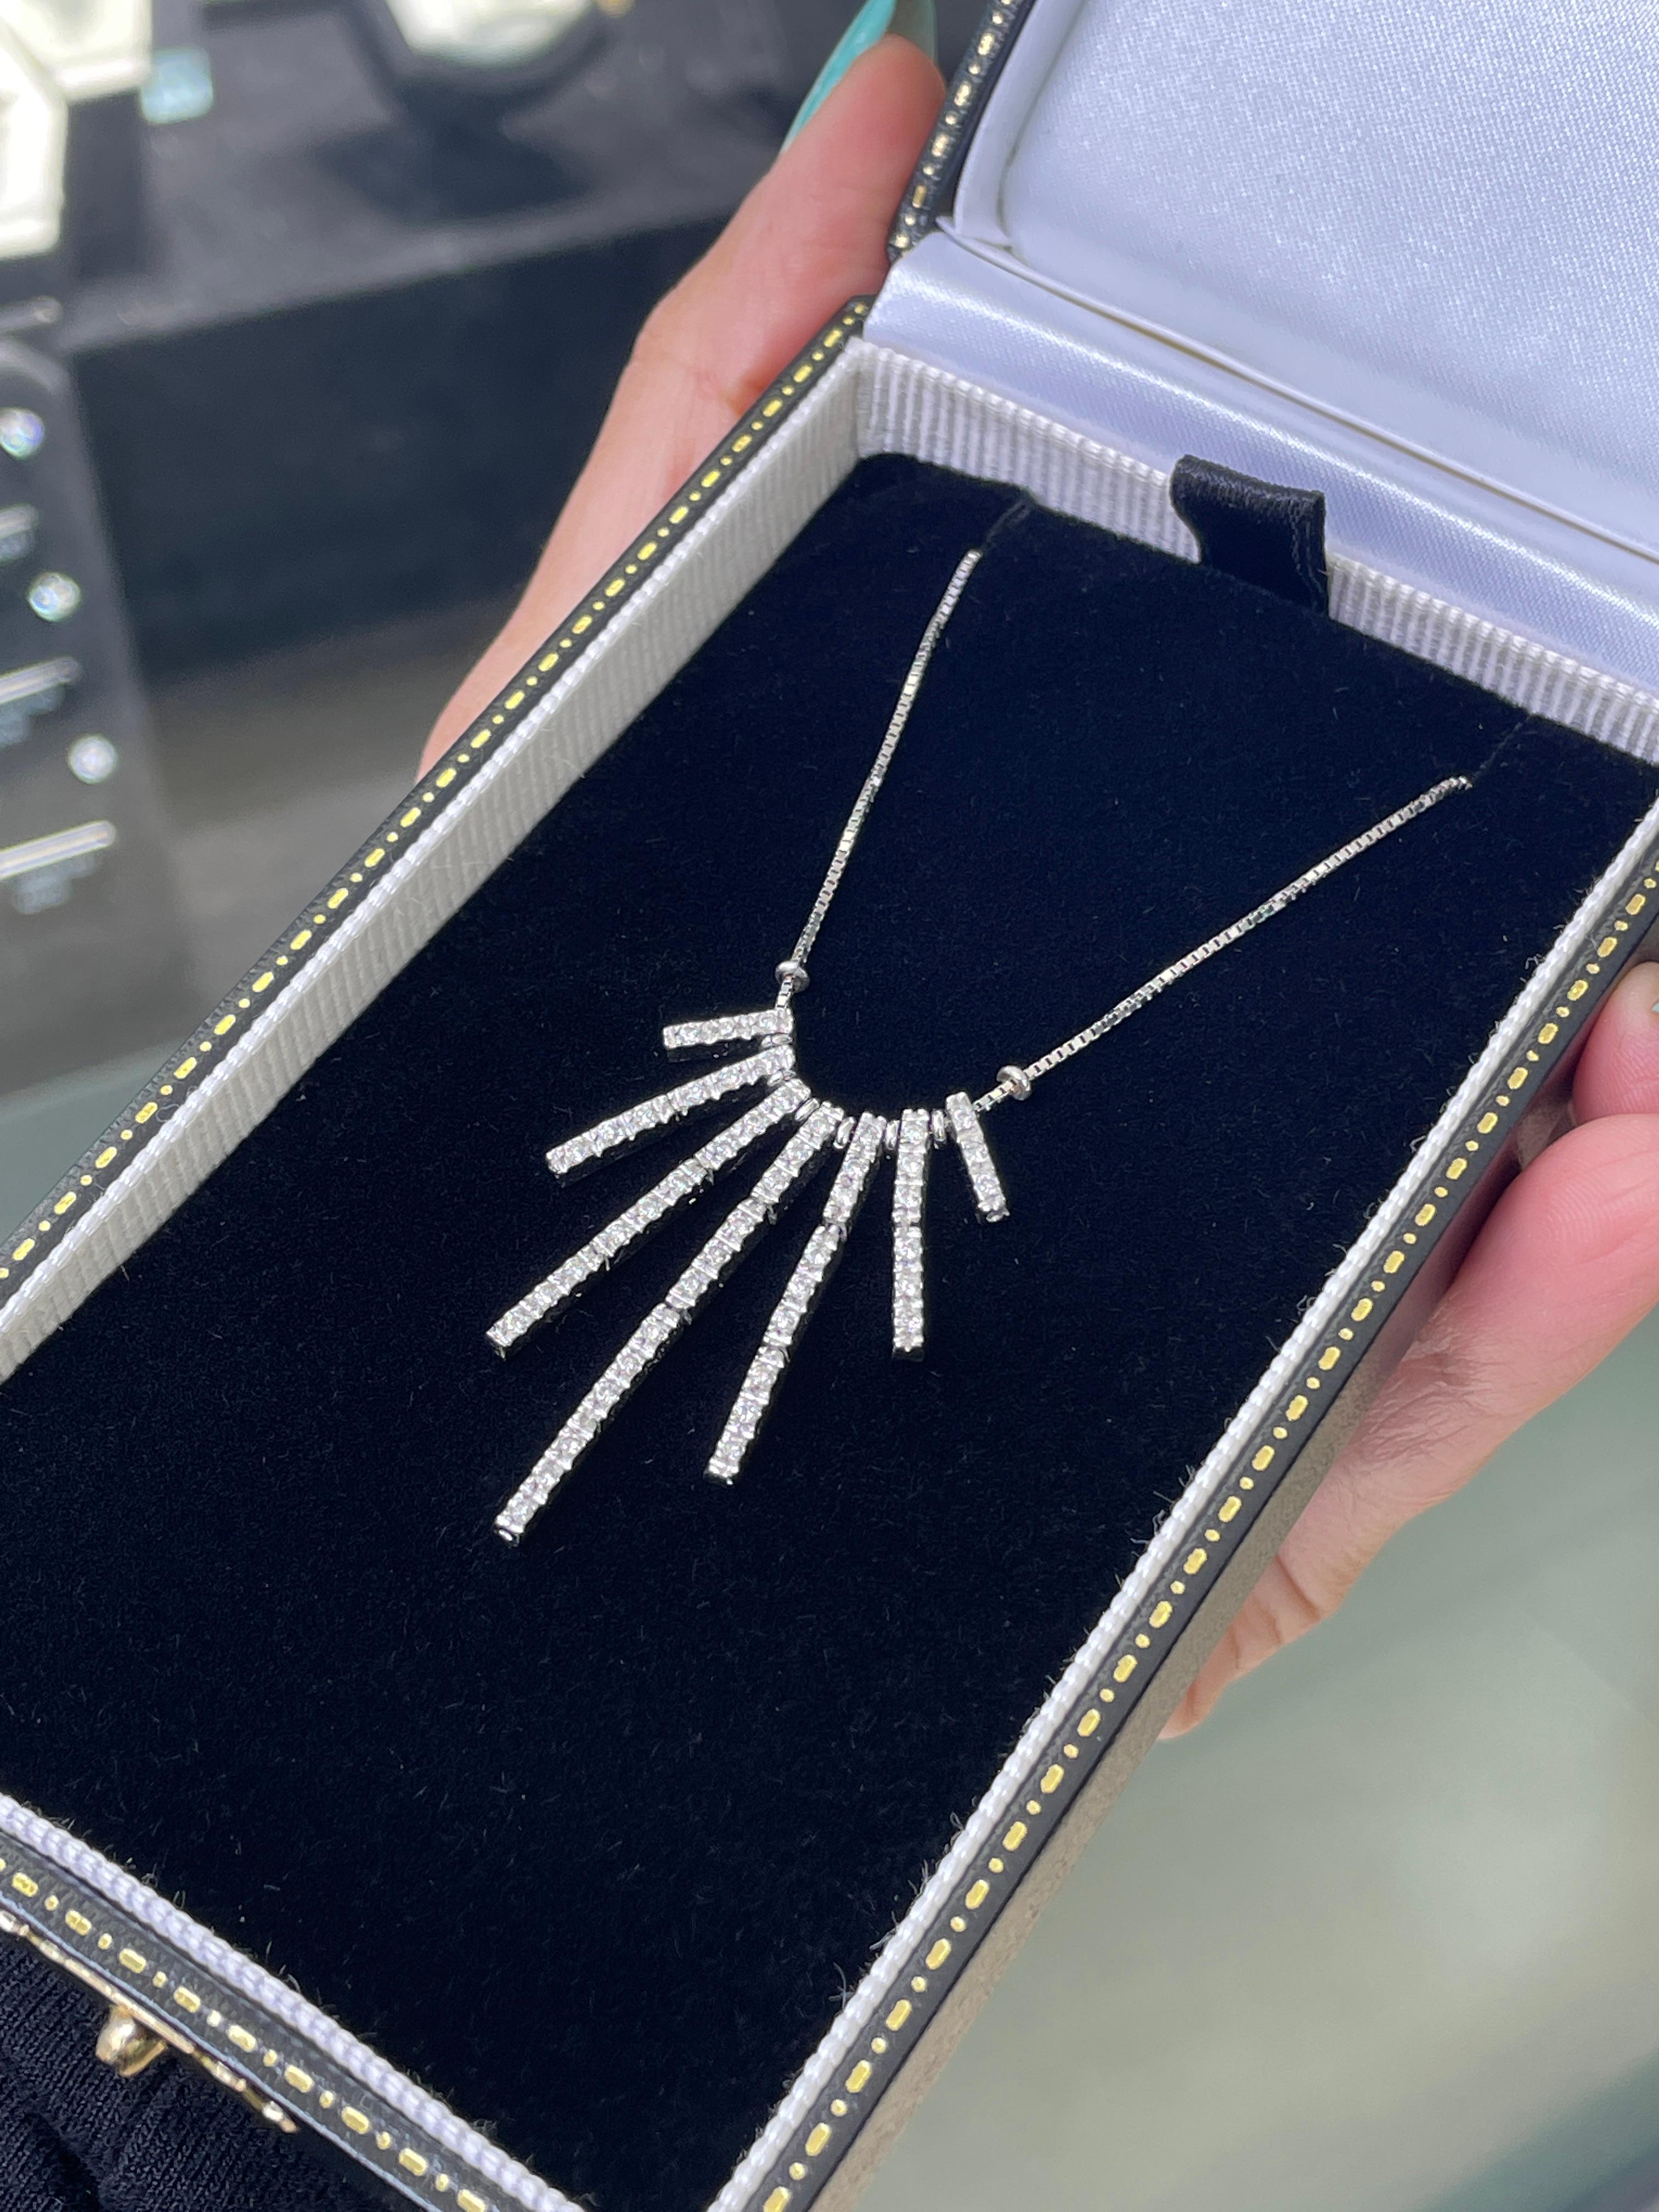 Crafted in 18 carat white gold, this elegant diamond cascade necklace showcases a delicate arrangement of sparkling diamonds that gracefully descend from the neckline, designed to mimic the flow of a waterfall. The centrepiece is formed of seven